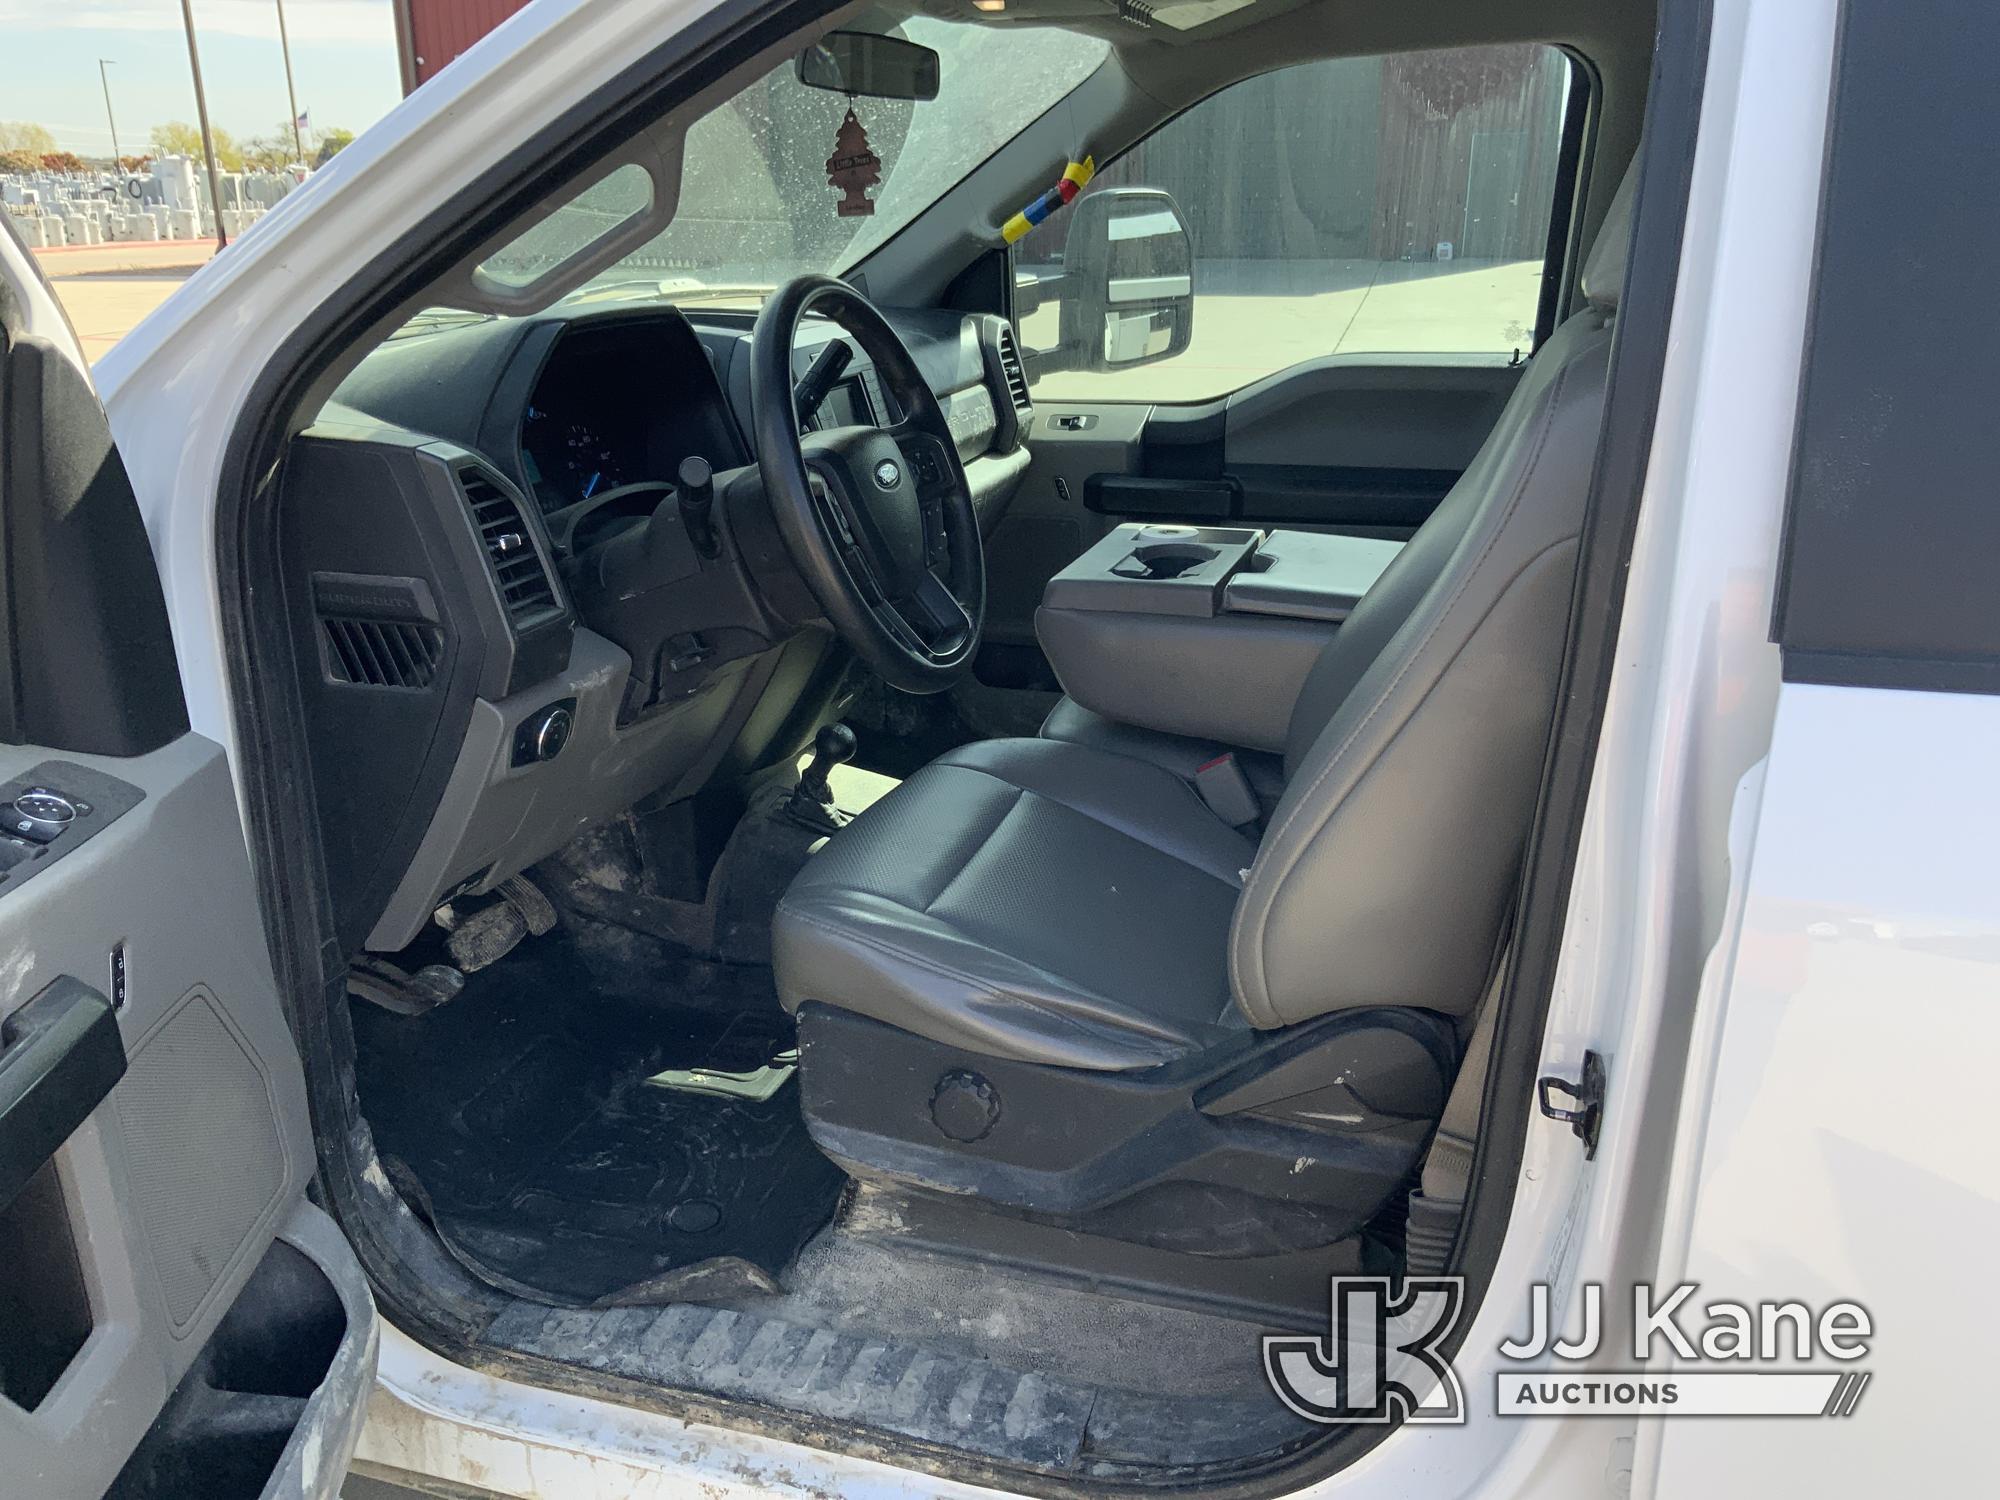 (Van Alstyne, TX) 2017 Ford F350 4x4 Crew-Cab Service Truck, Cooperative Owned Runs. Moves.